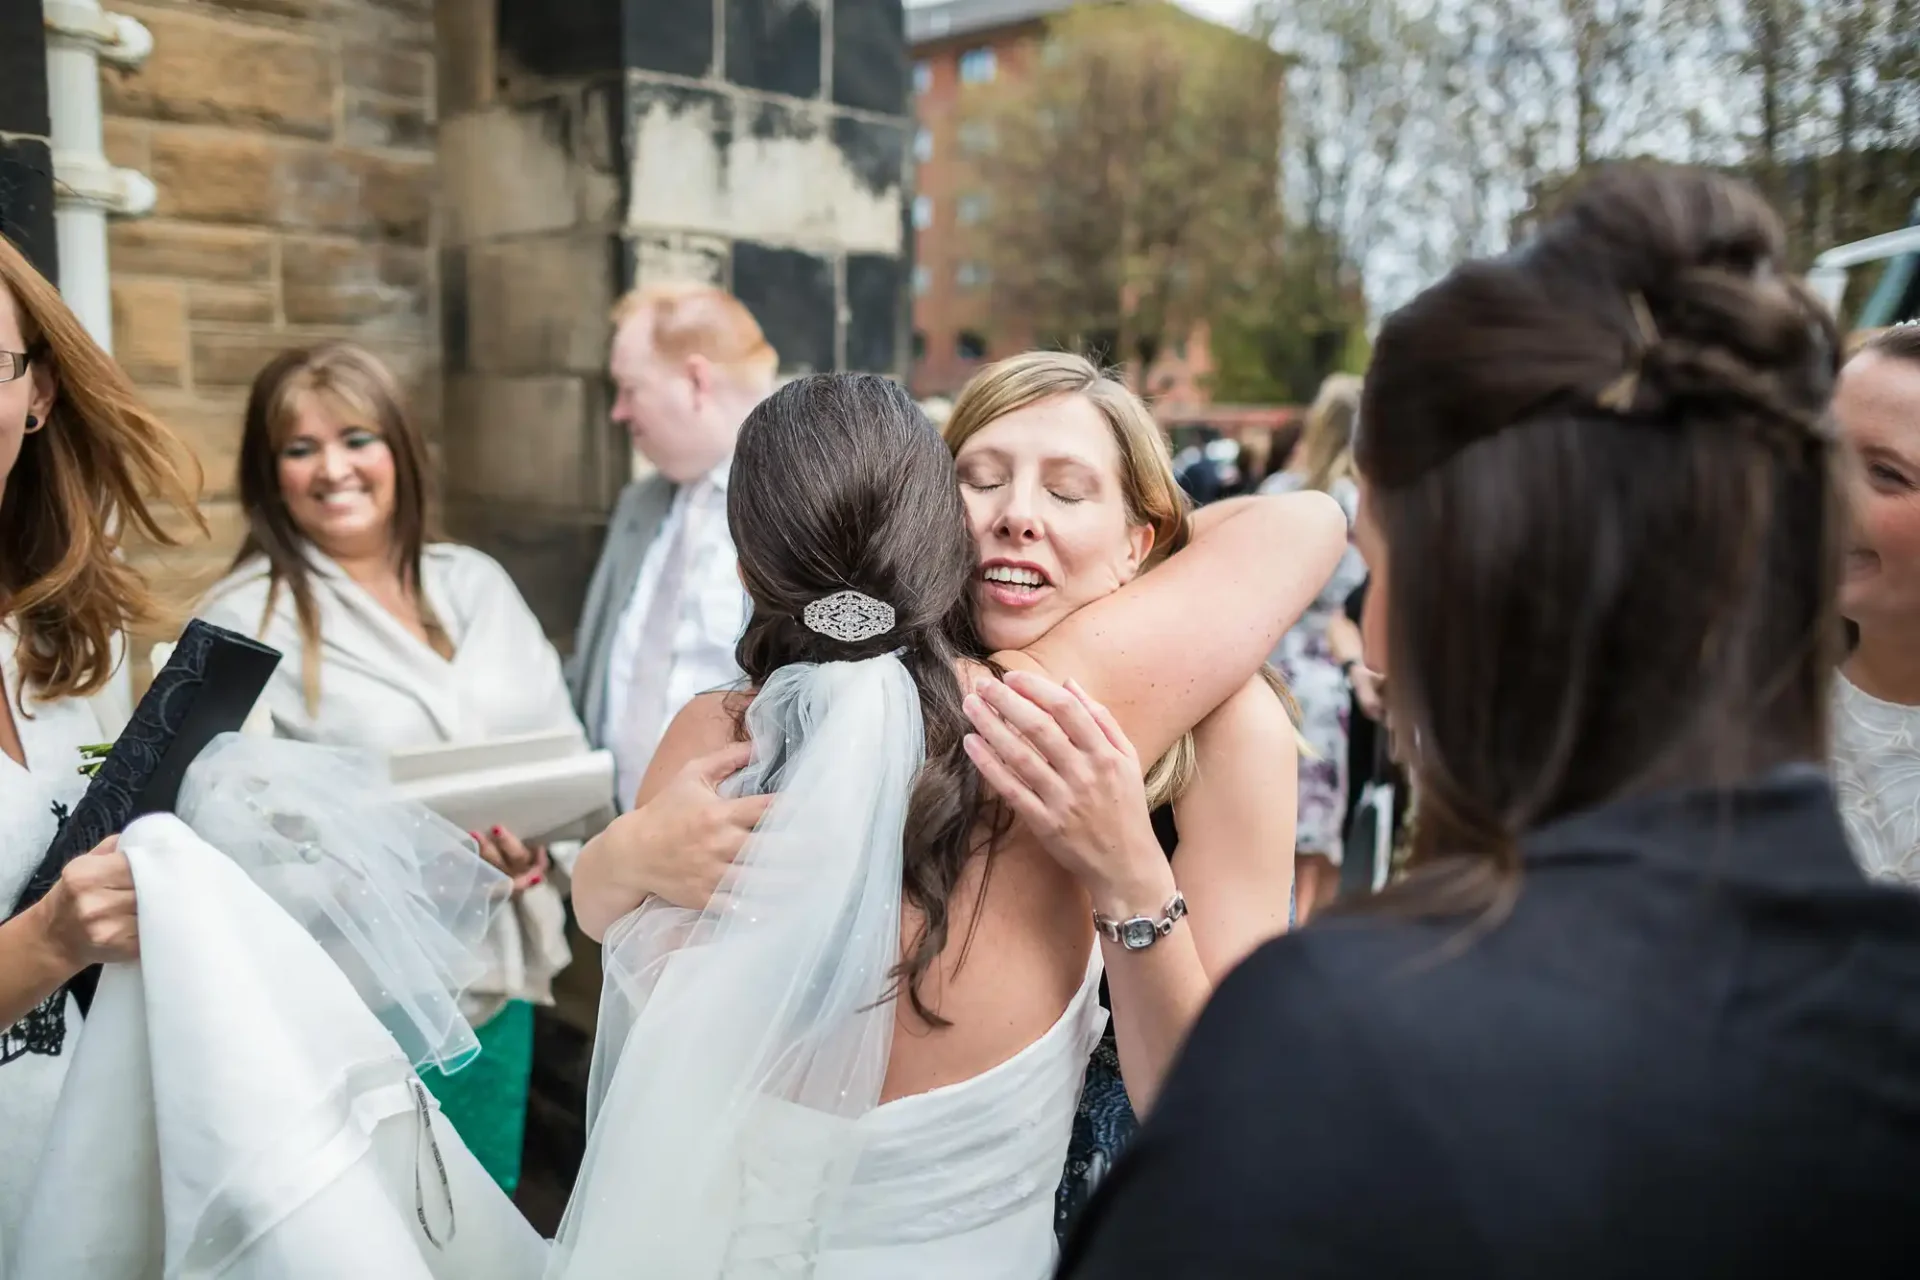 A bride and a woman warmly embracing at a wedding, with guests looking on and smiling.